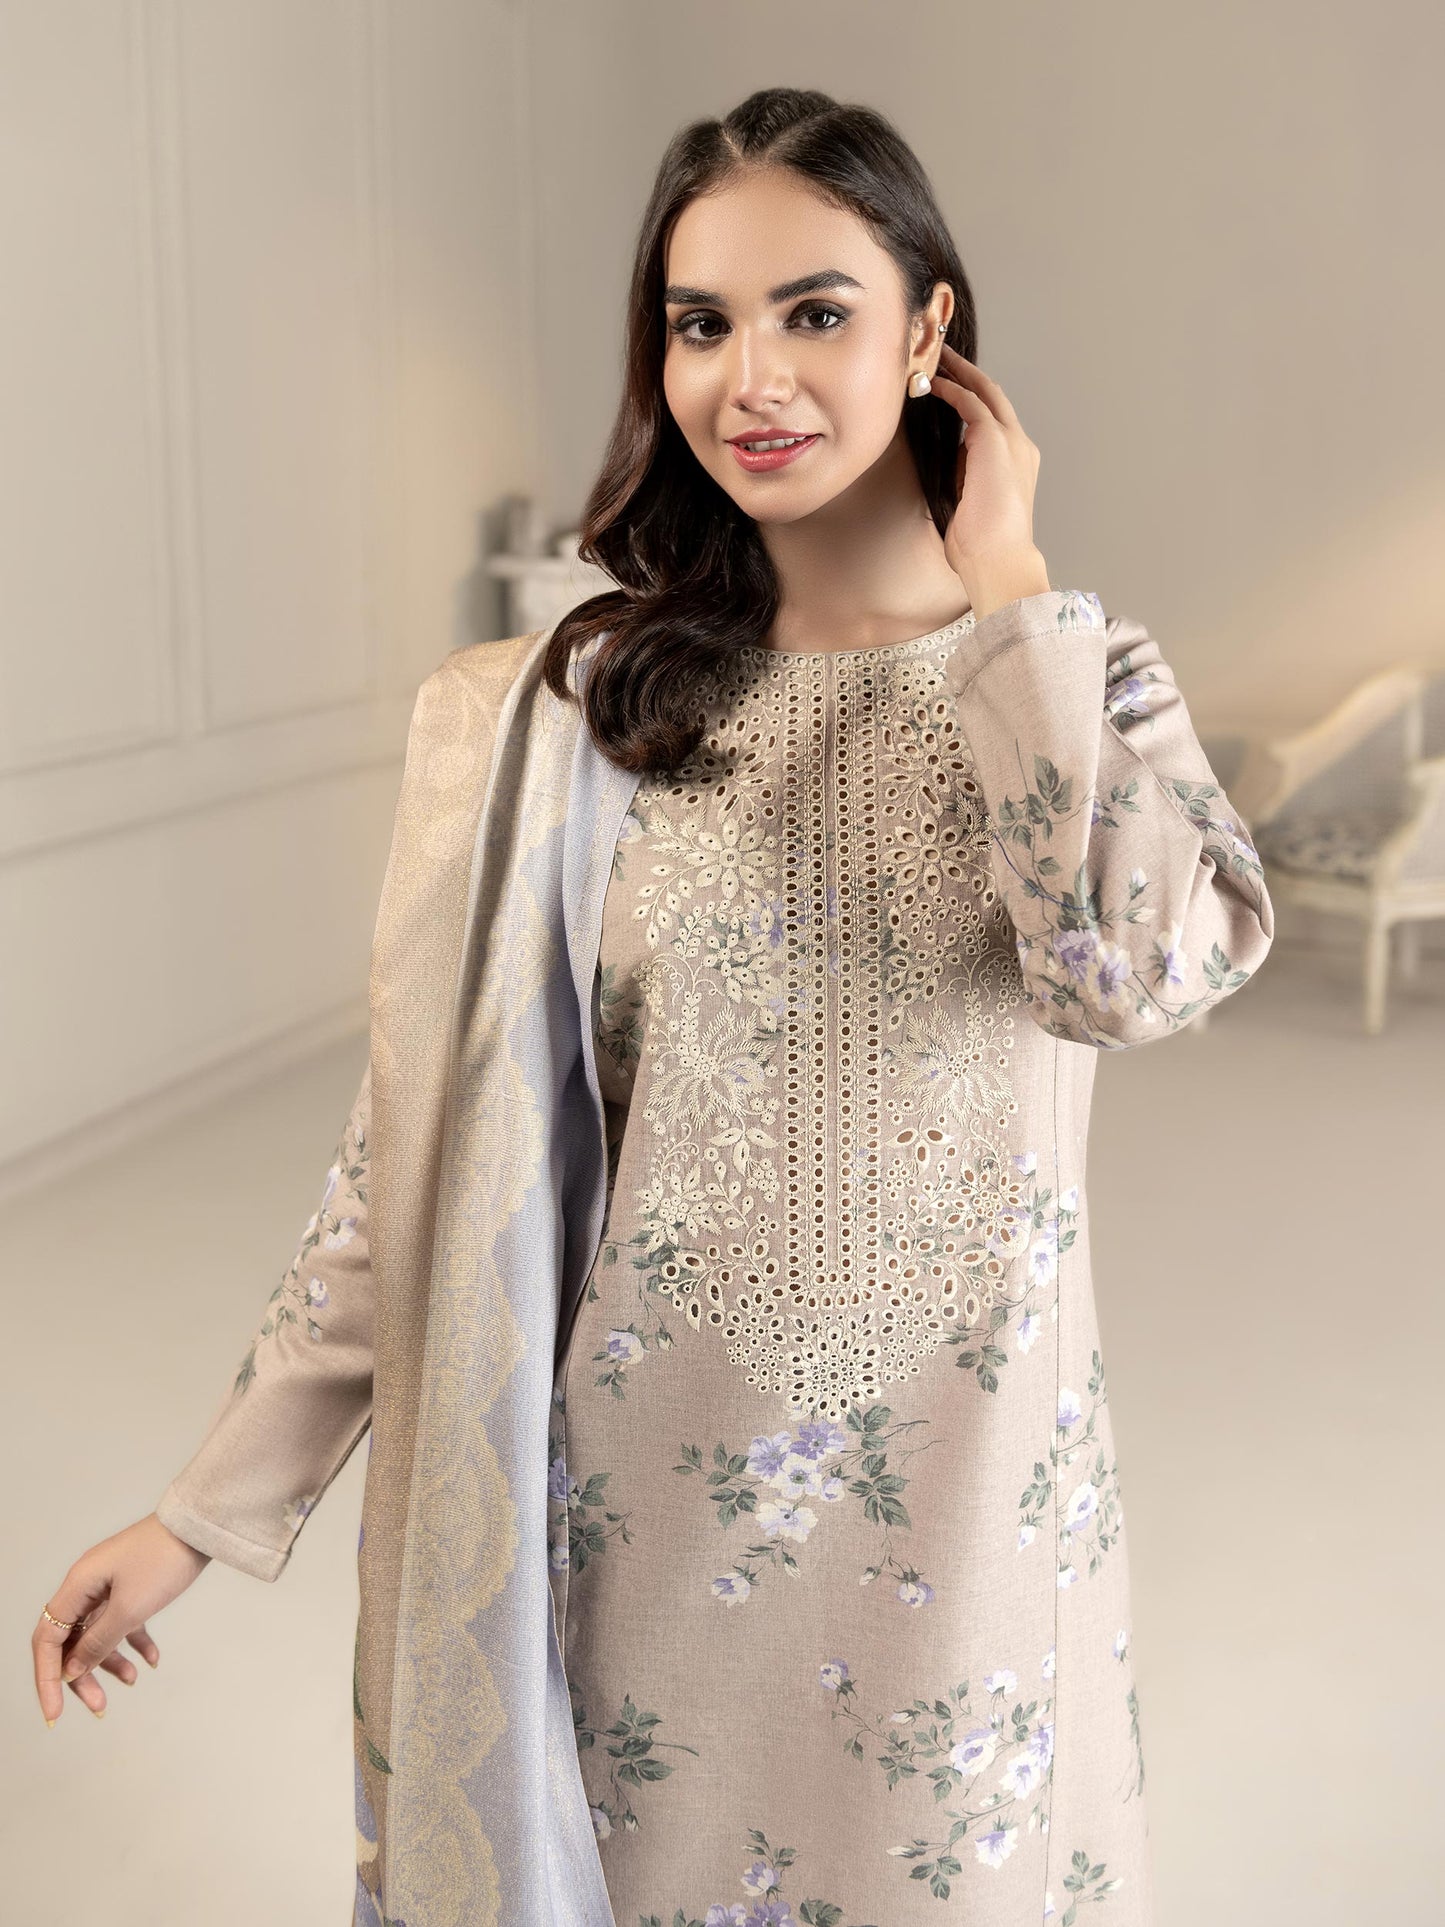 3 Piece Khaddar Suit-Embroidered(Unstitched)